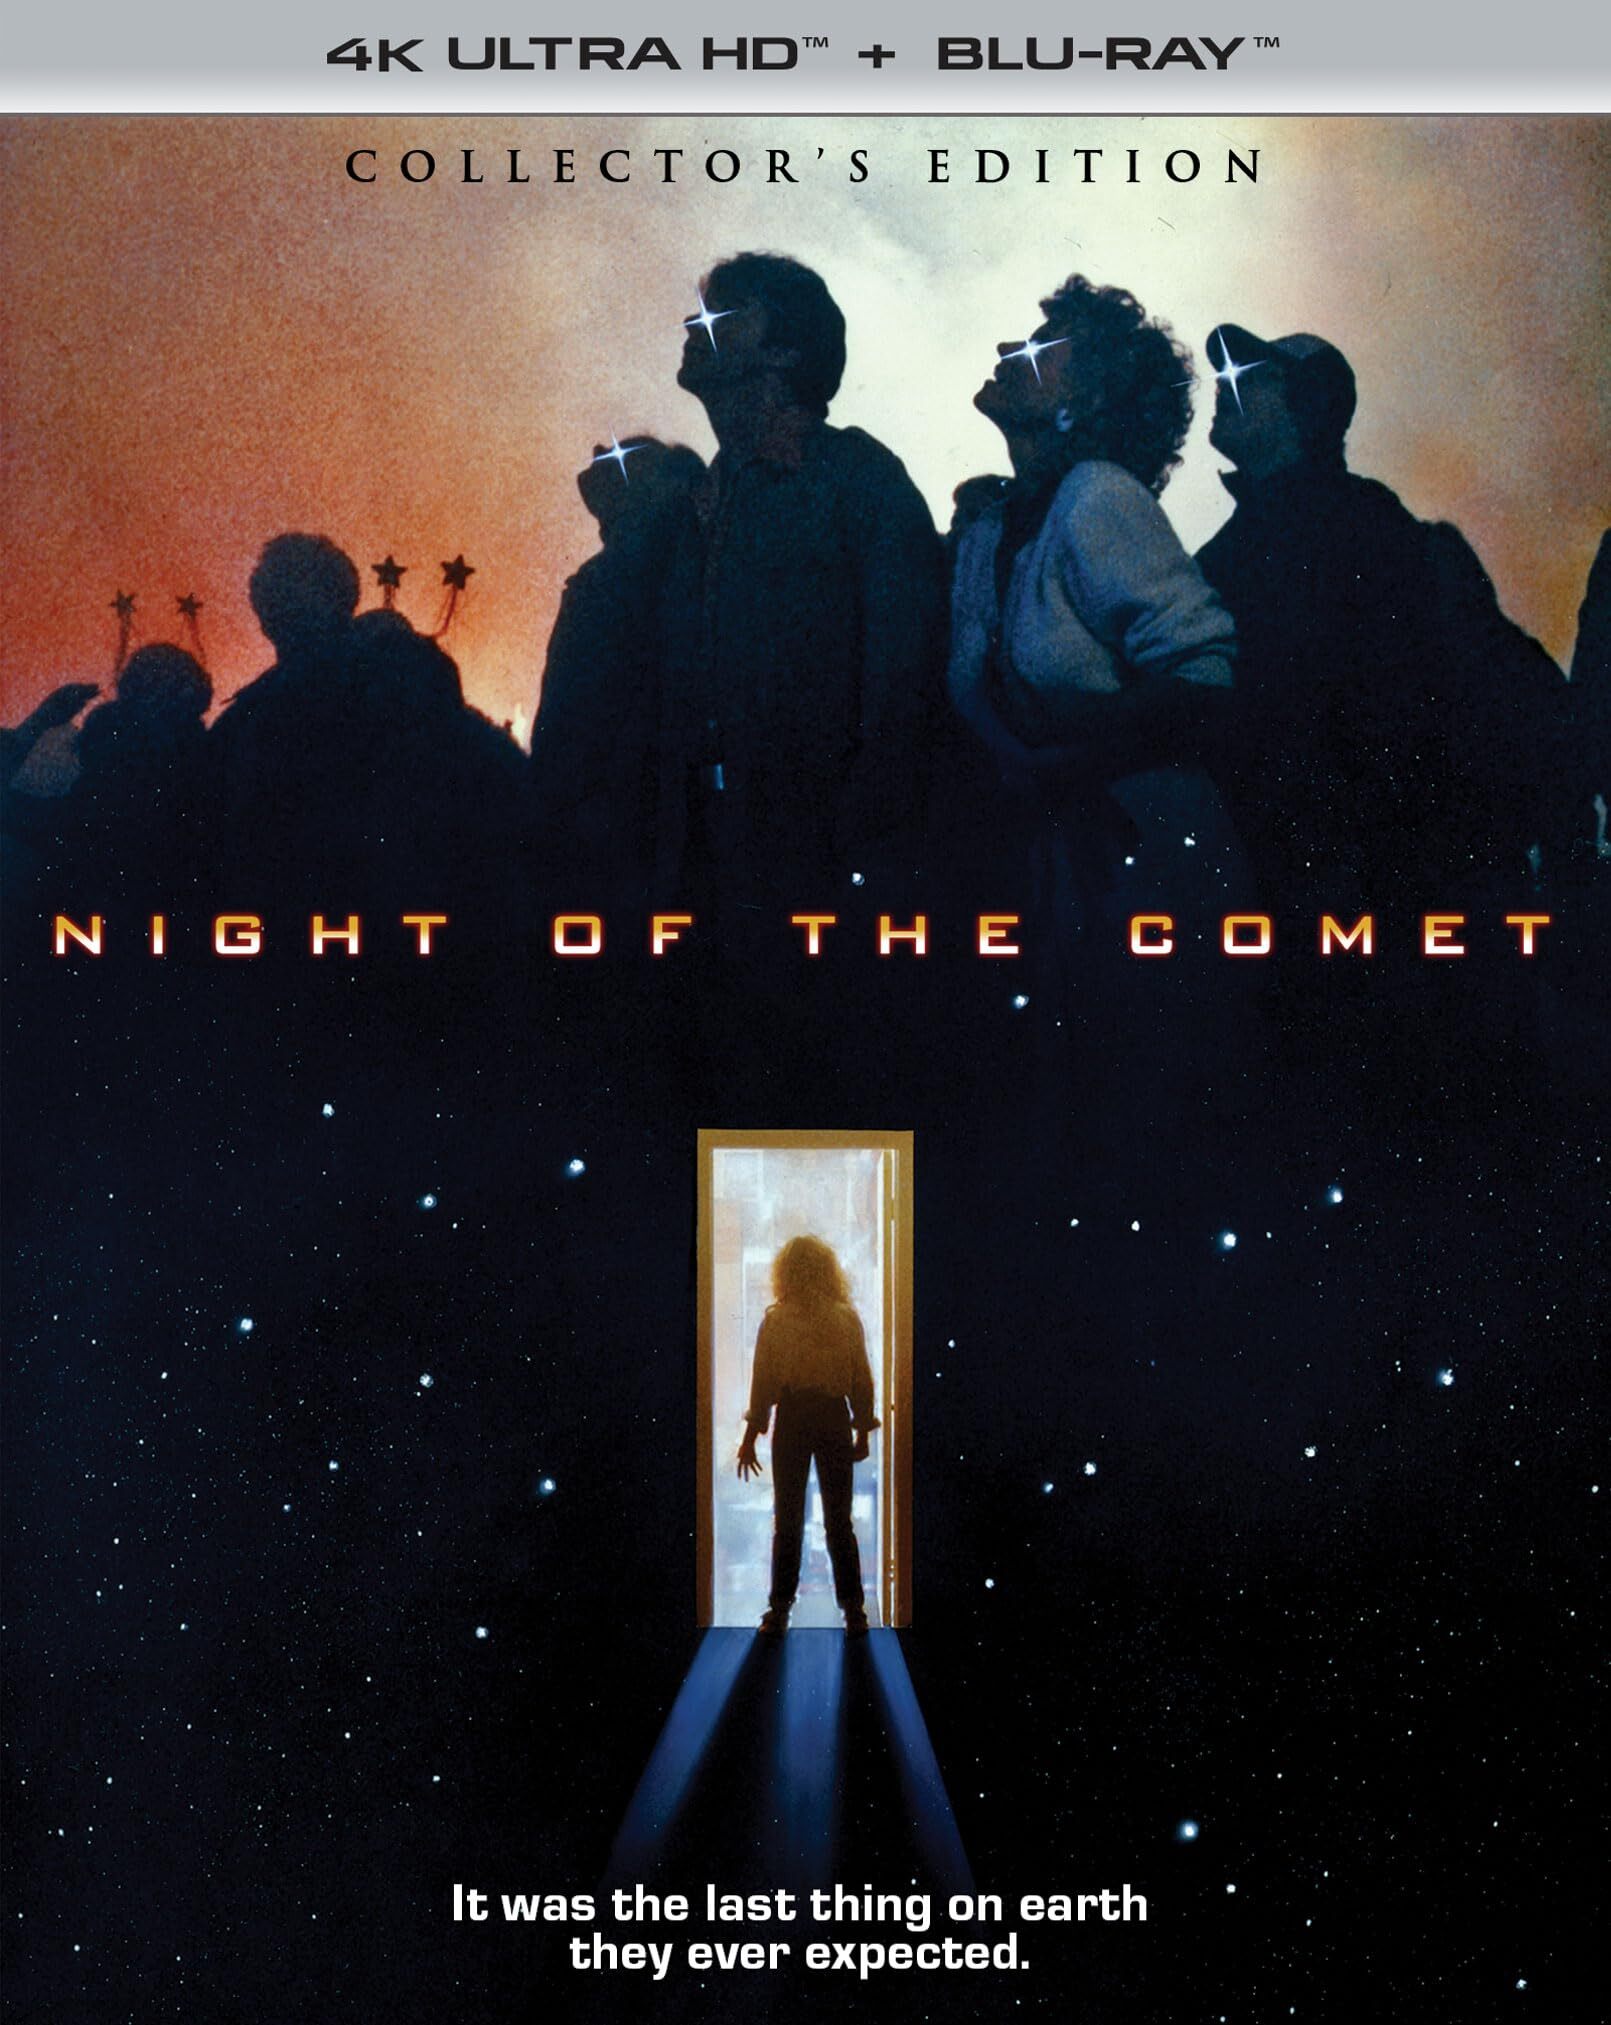 NIGHT OF THE COMET (COLLECTOR'S EDITION) 4K UHD/BLU-RAY